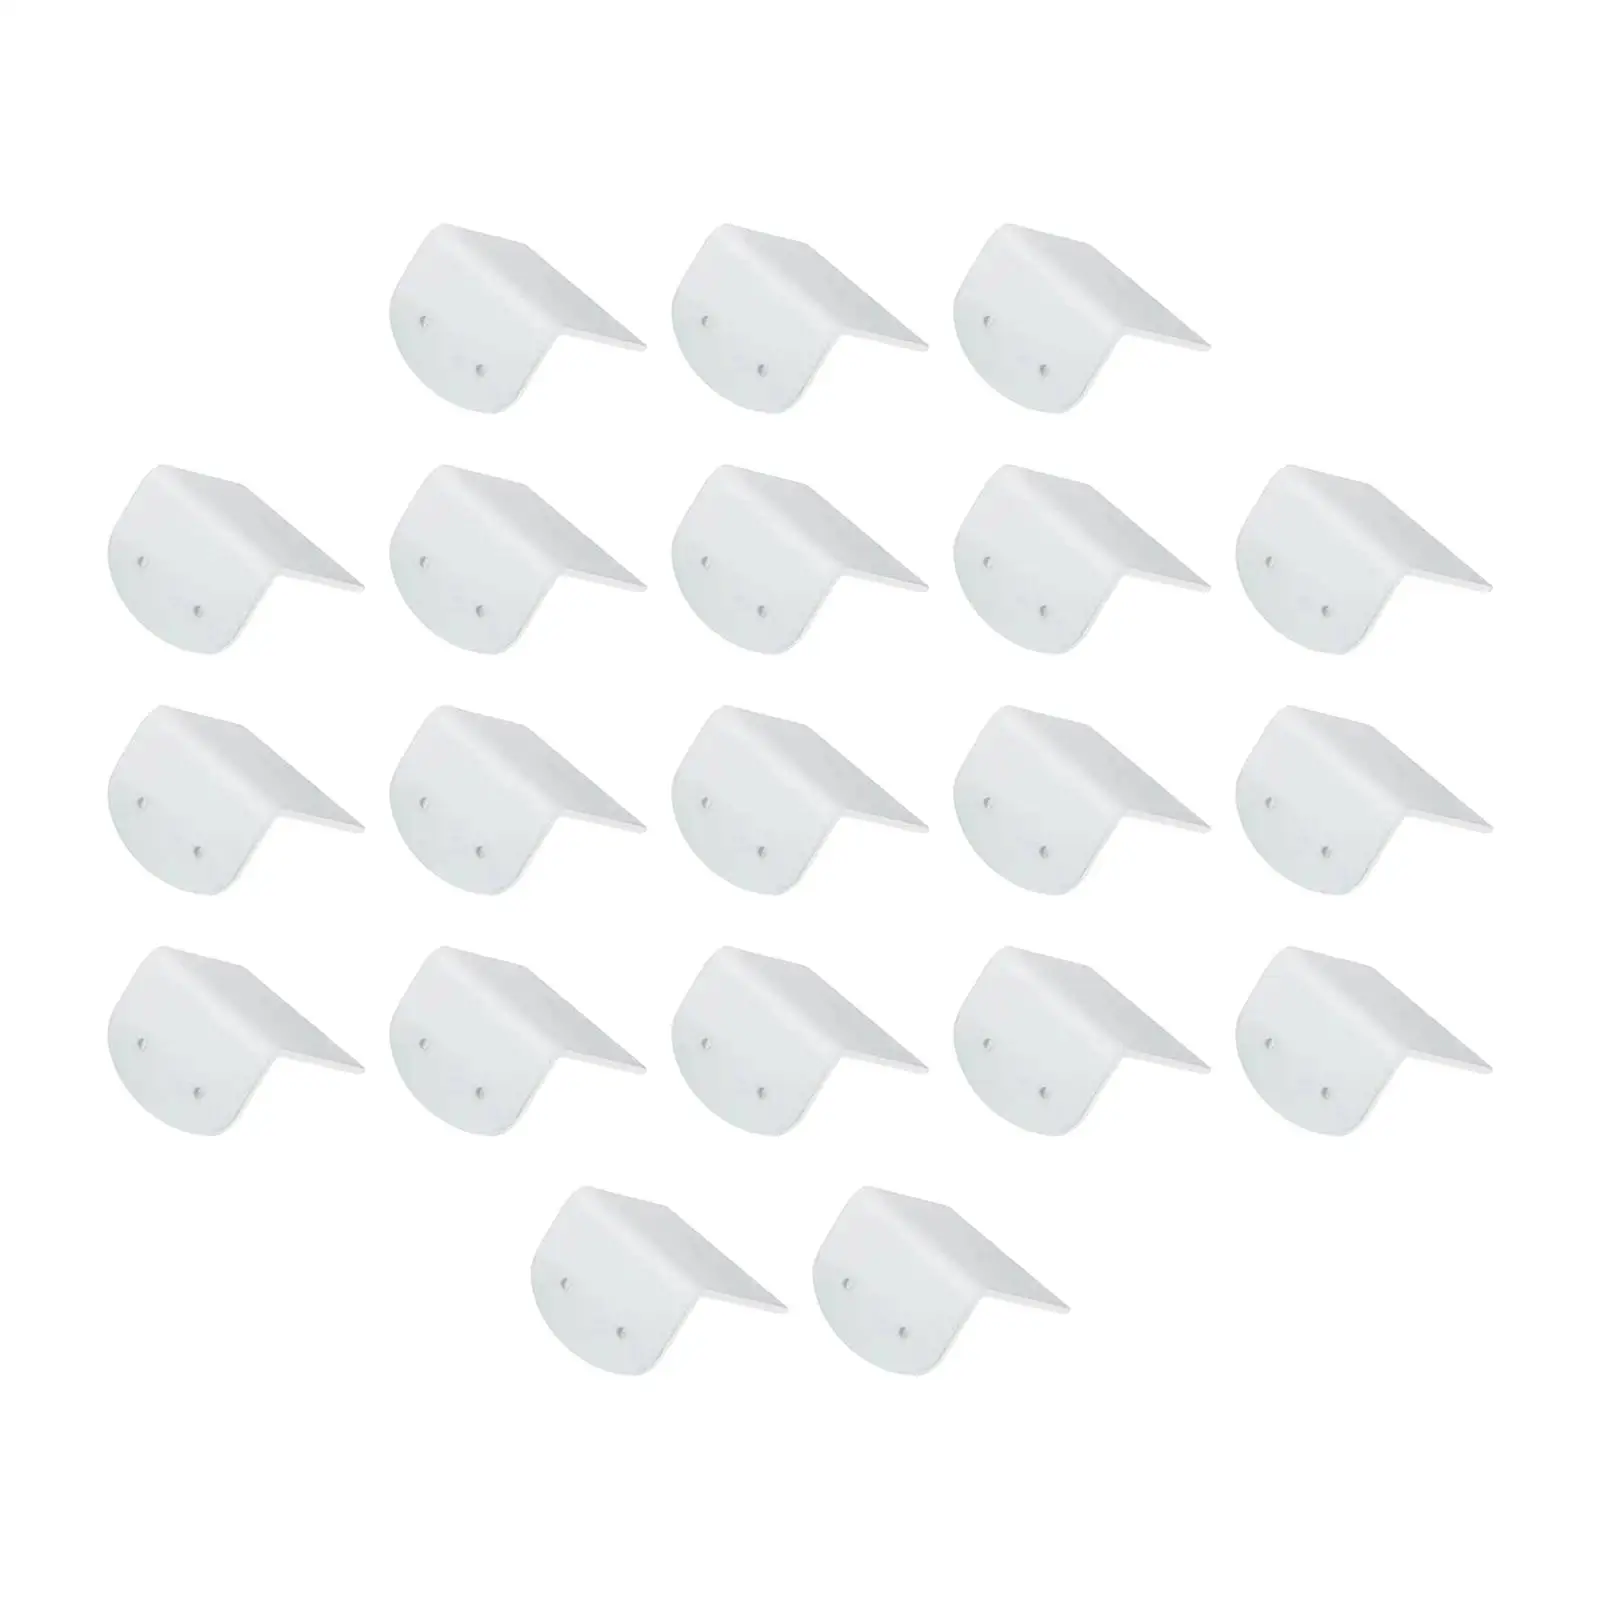 20x Hanging Earring Cards Durable White Carrying Ear Studs Holder Jewelry Packaging Acrylic for store Selling Salon Shop